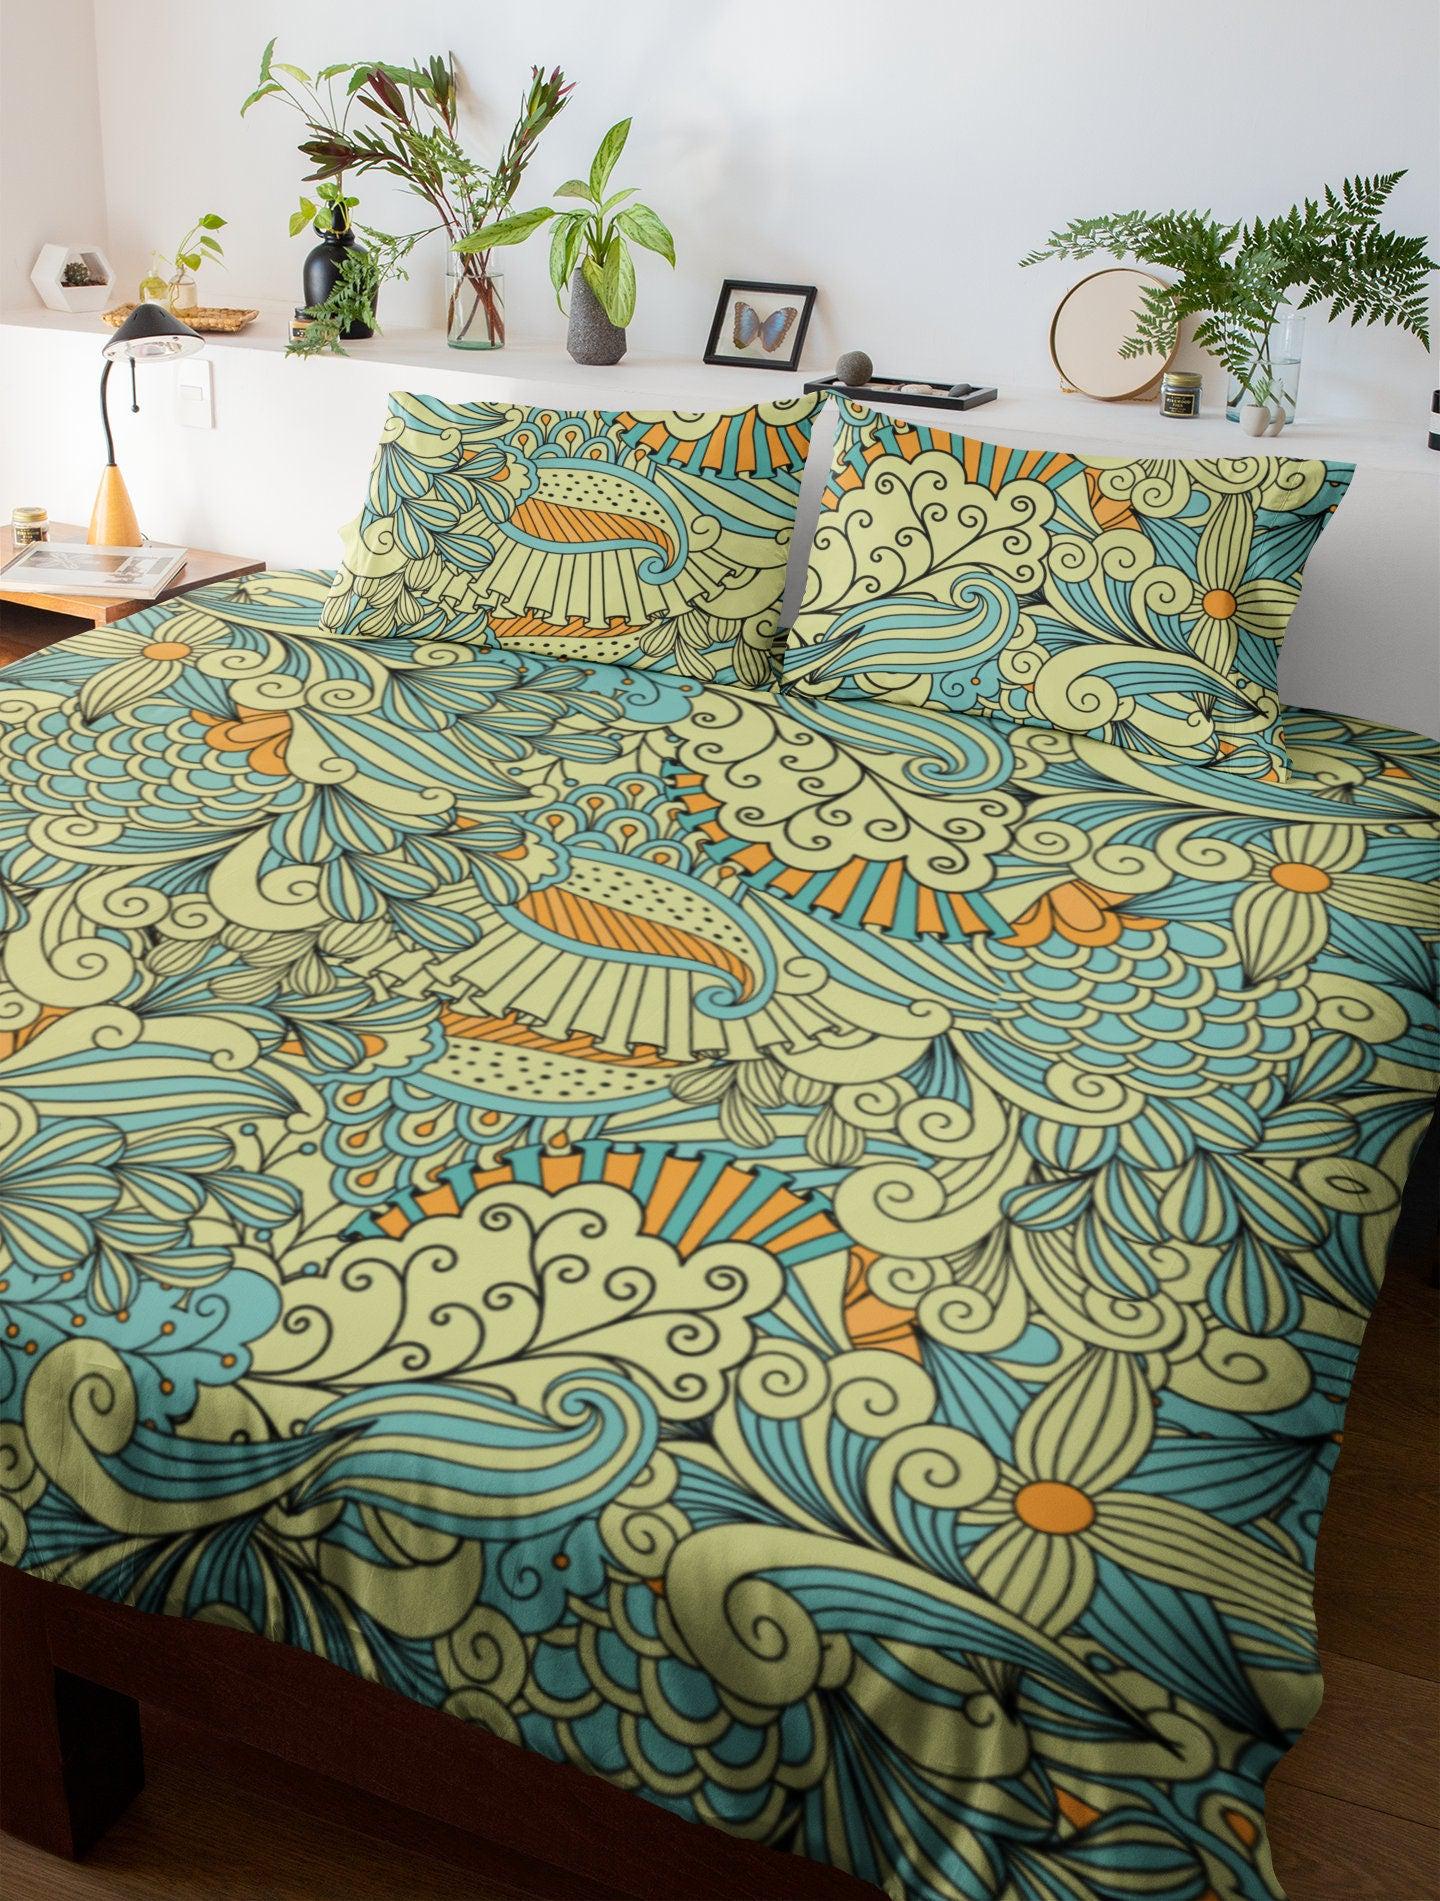 daintyduvet Blue and Yellow Mermaid Paisley Pattern Duvet Cover Set with Pillowcase, Dorm Bedding Set, Comforter Cover